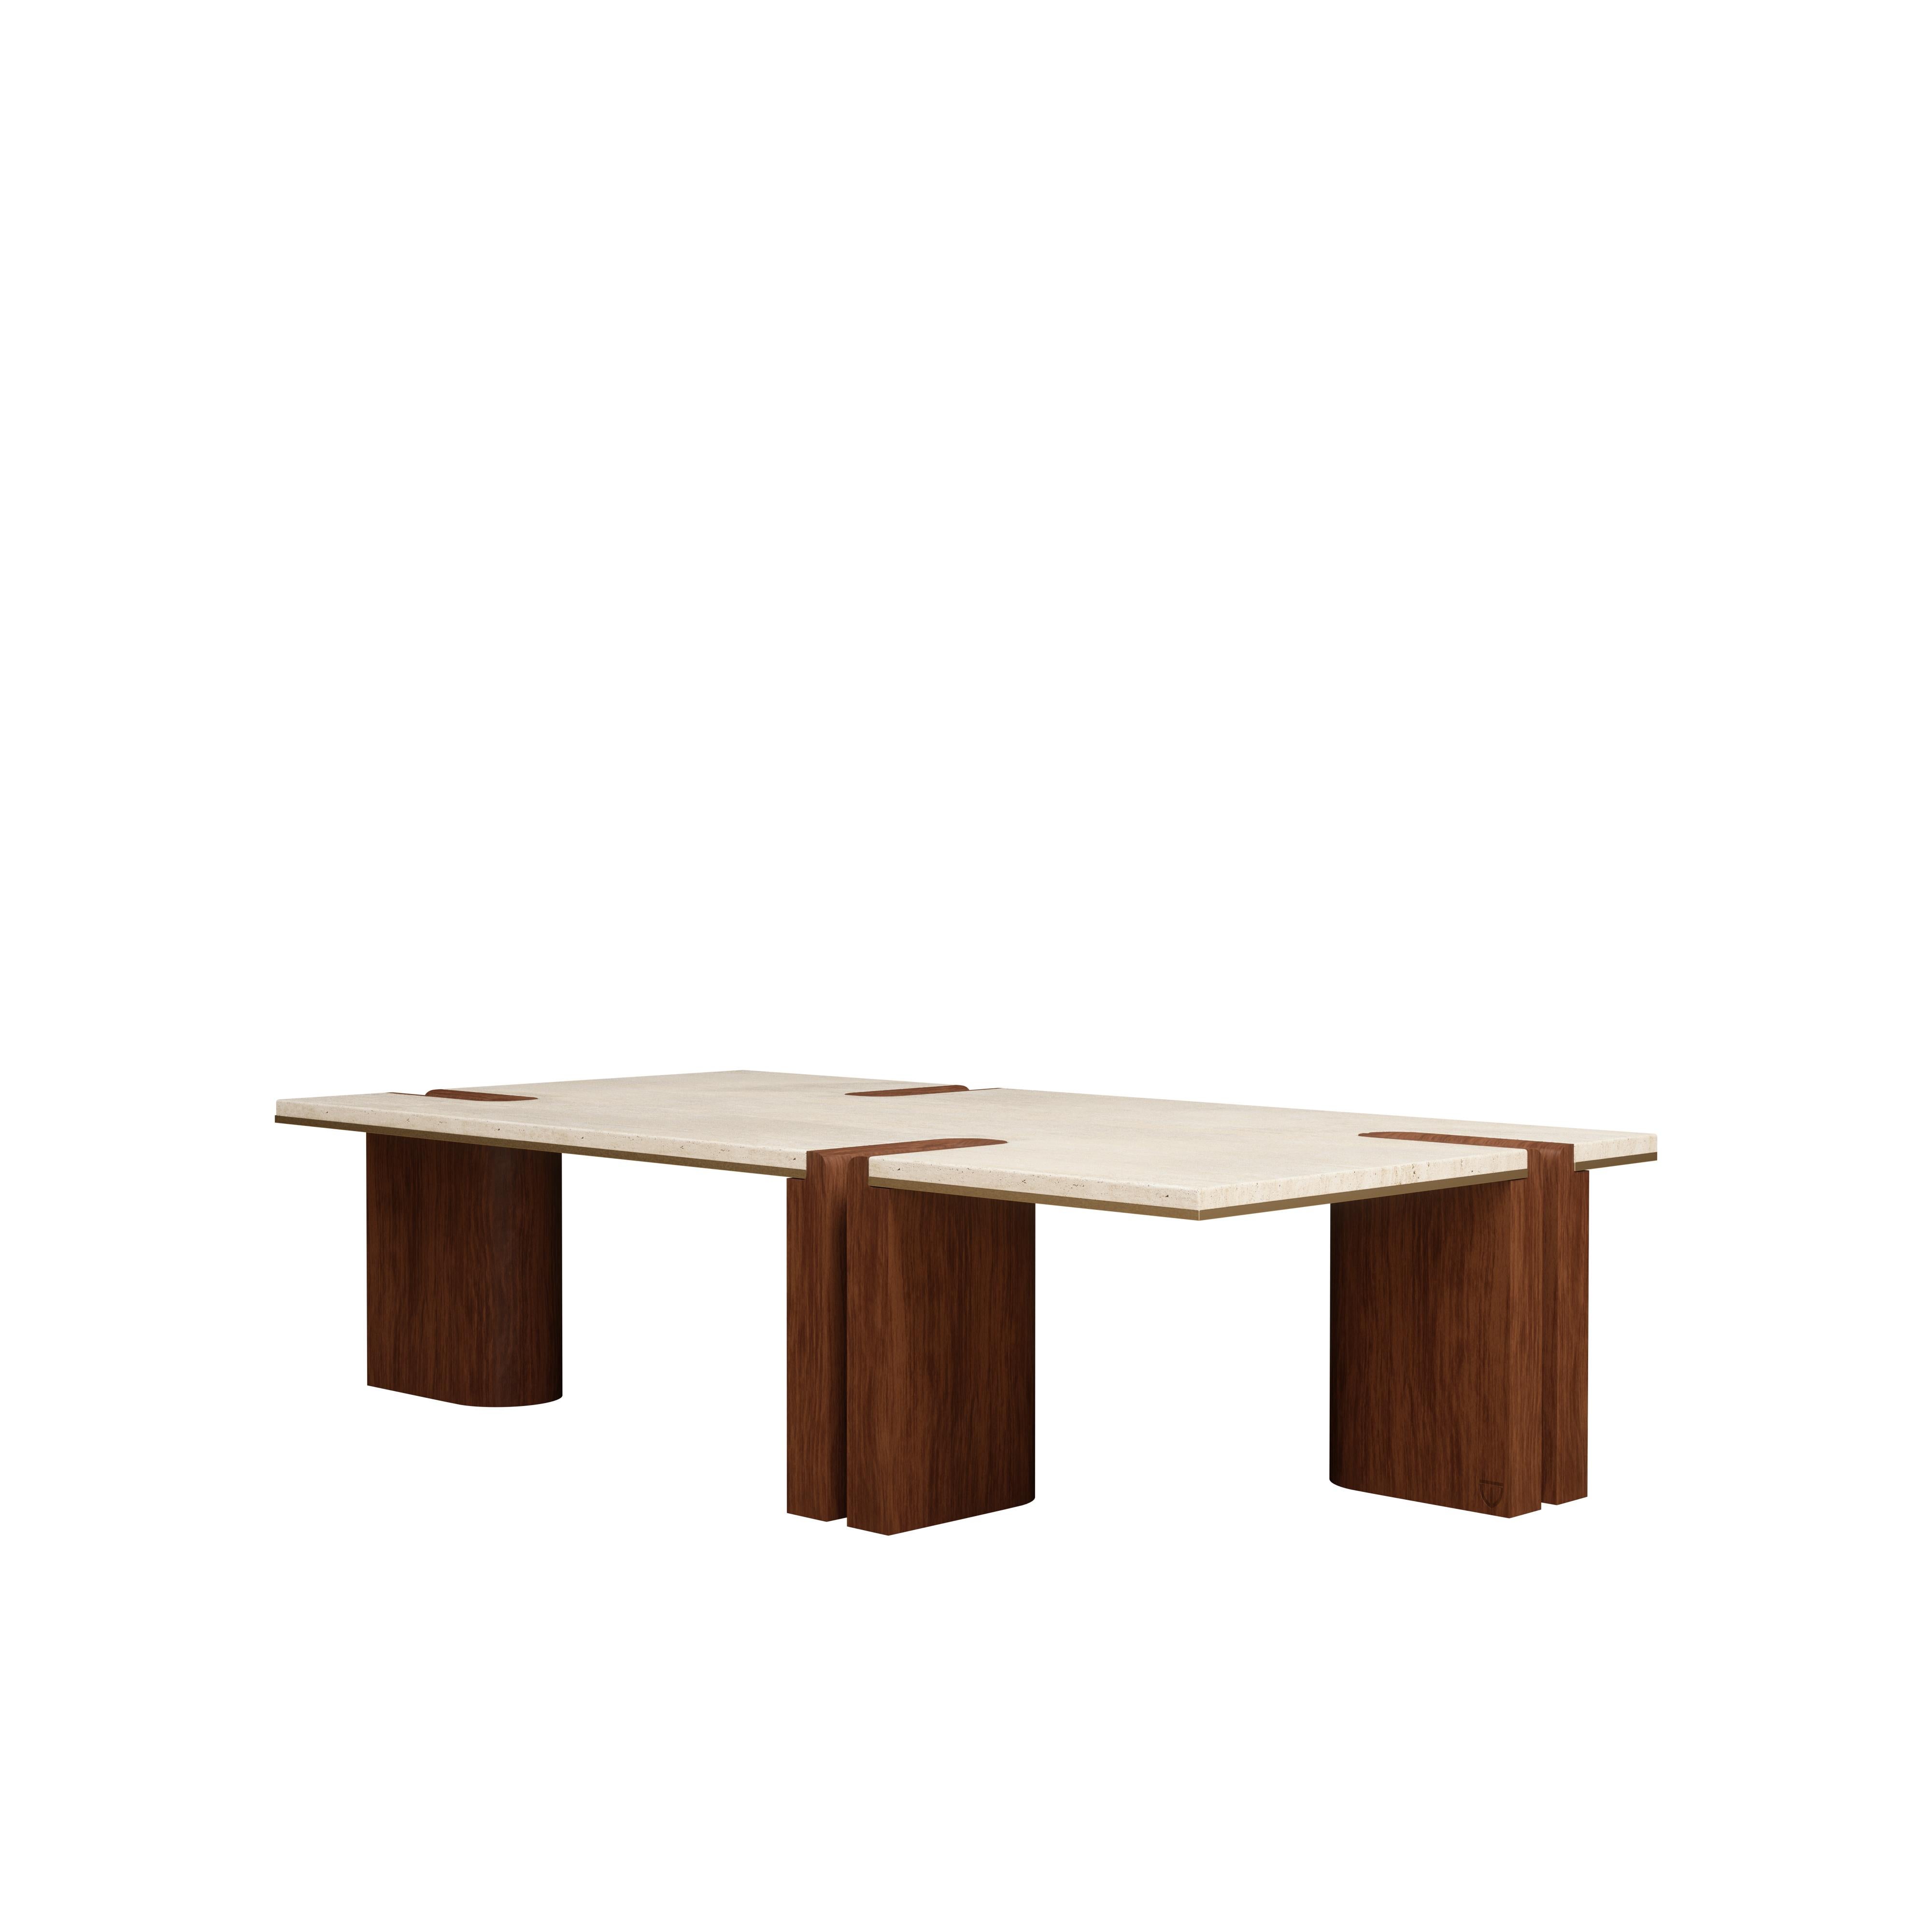 21st Grenville Center Table Tavetine Walnut Wood In New Condition For Sale In RIO TINTO, PT